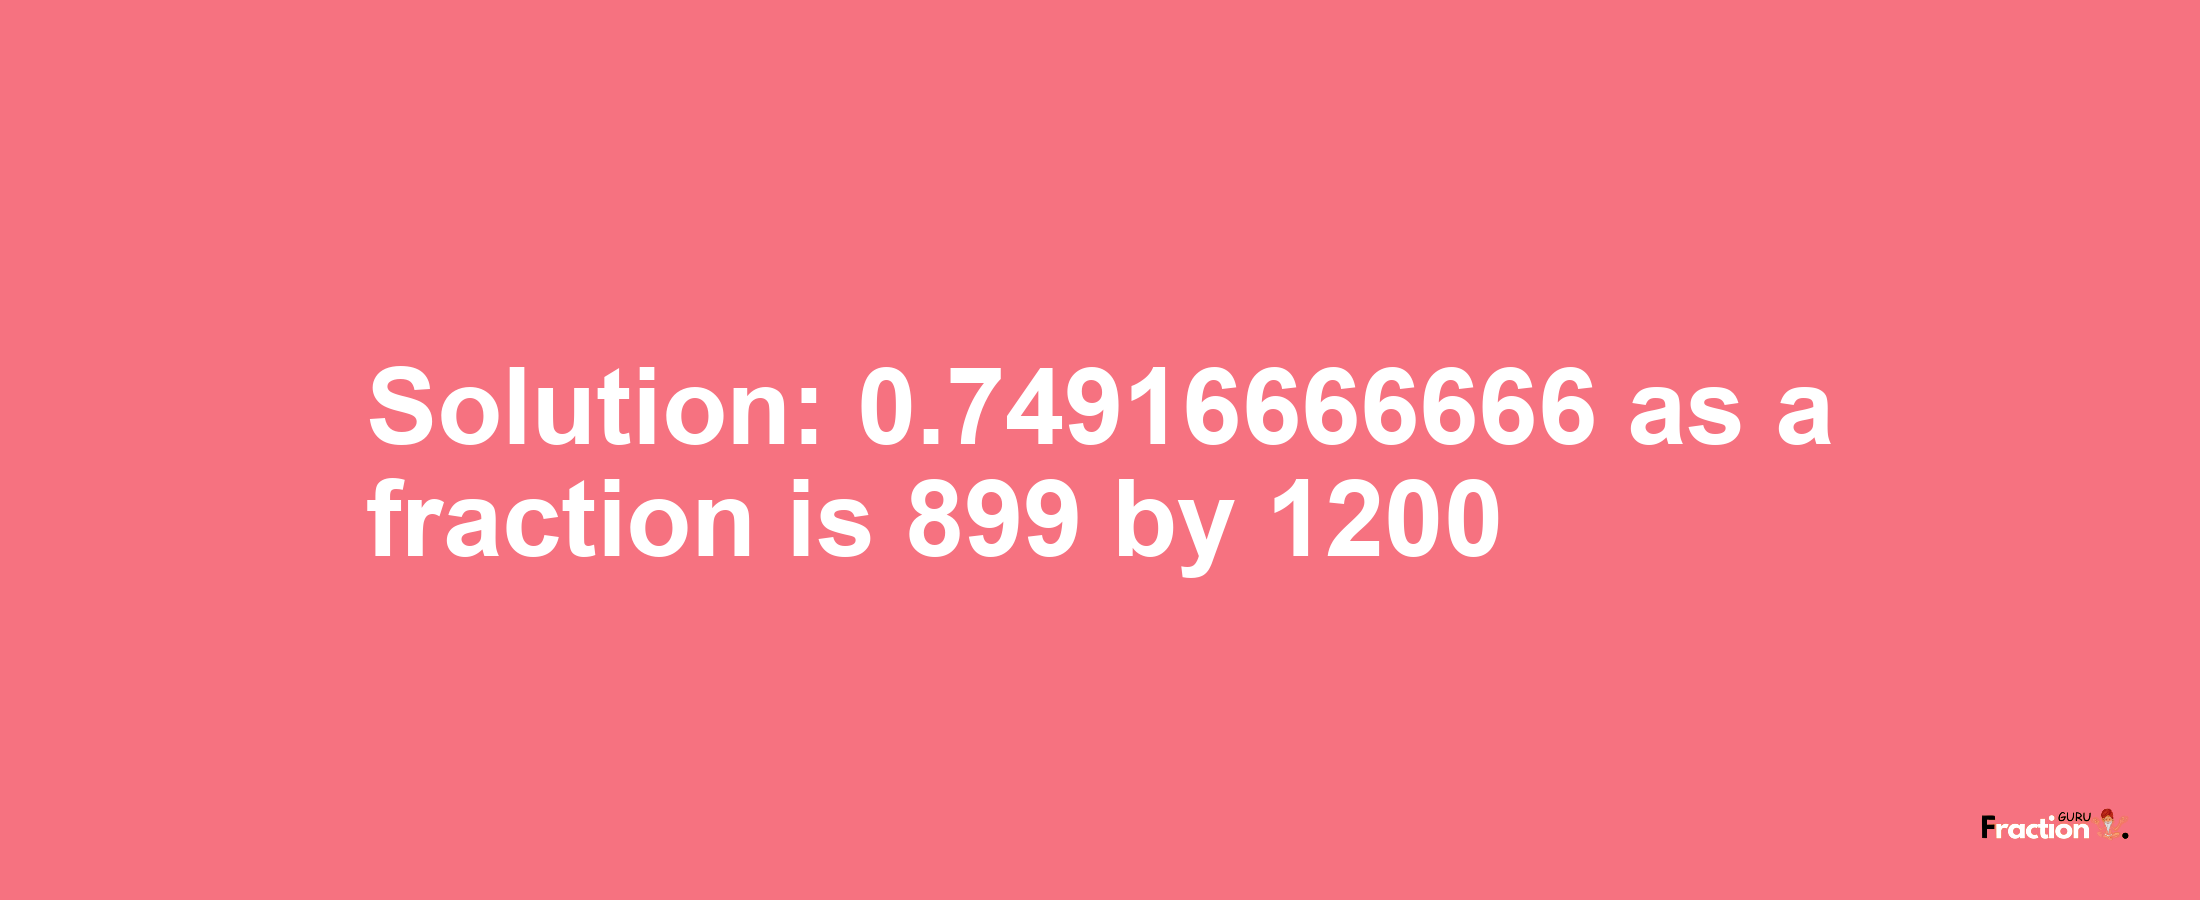 Solution:0.74916666666 as a fraction is 899/1200